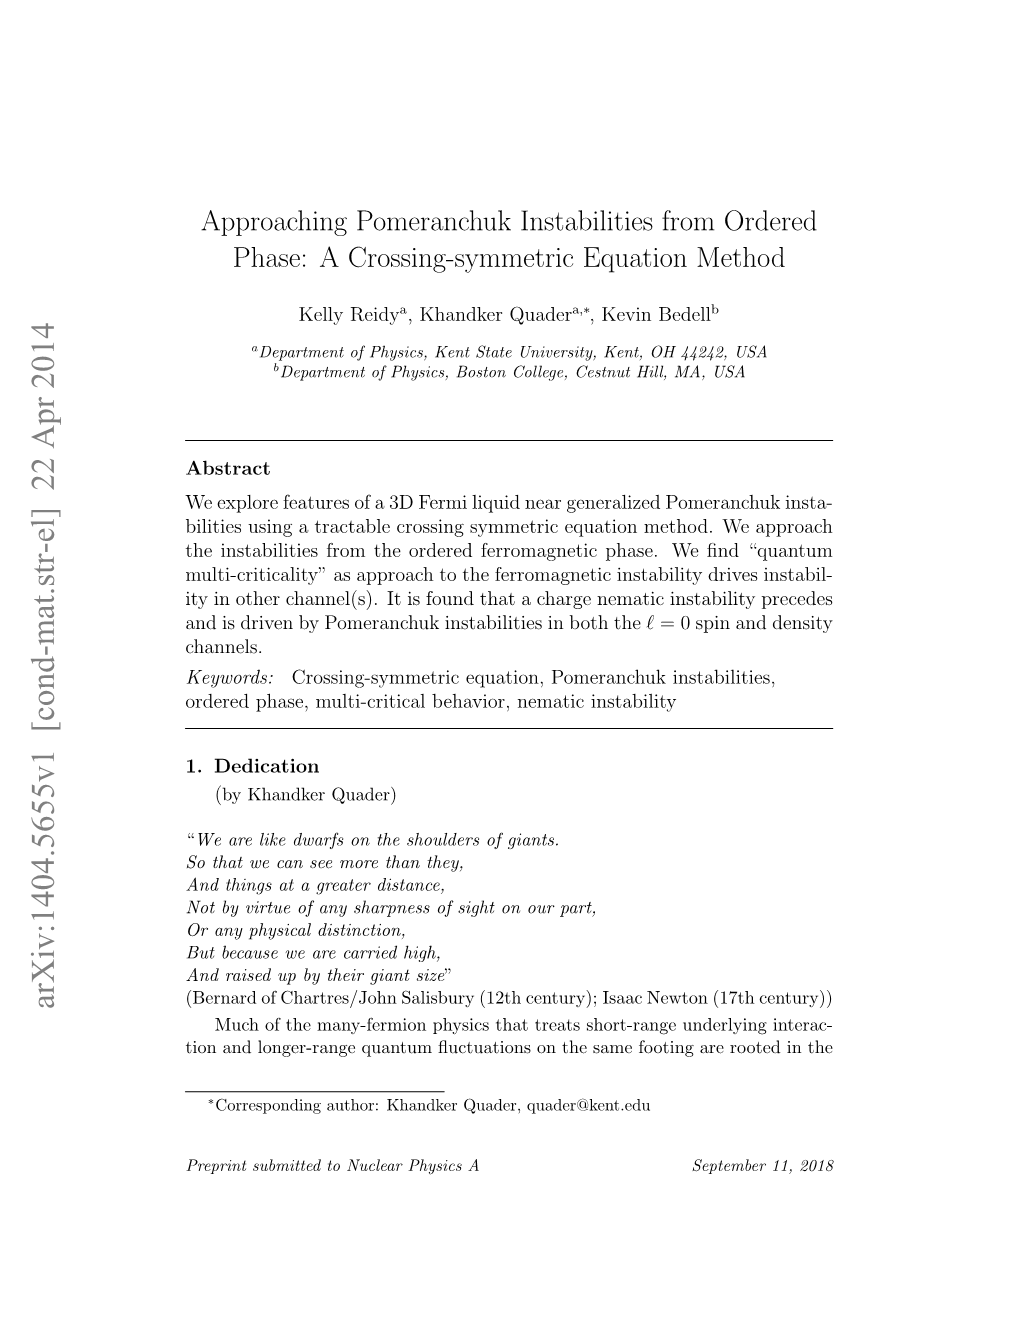 Approaching Pomeranchuk Instabilities from Ordered Phase: a Crossing-Symmetric Equation Method